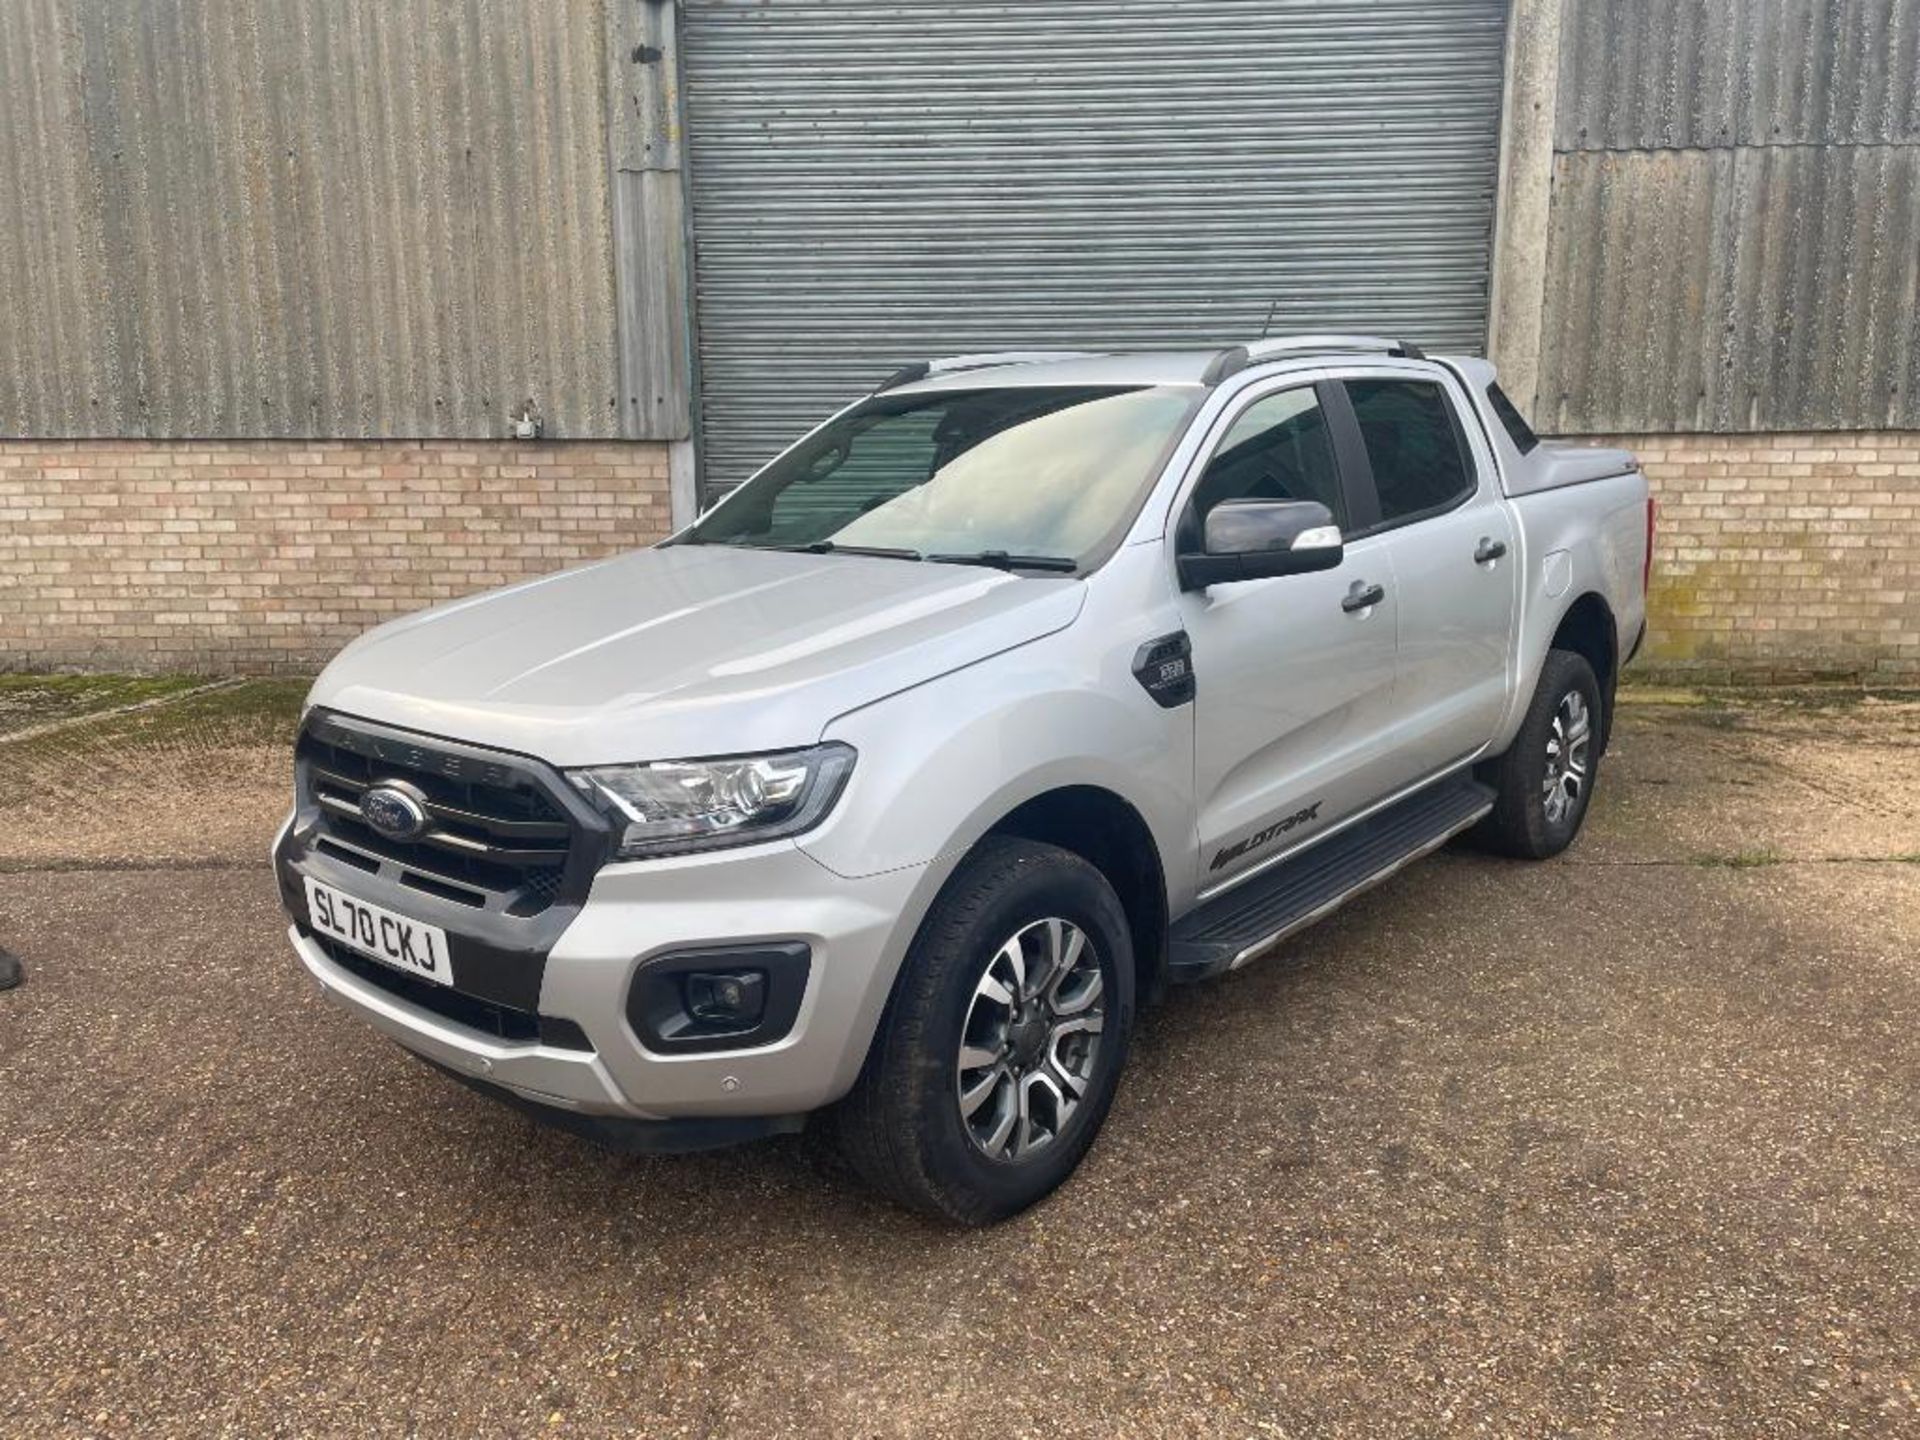 2020 Ford Ranger Wildtrack 3.2 6 Auto 4wd double cab pickup with Alpha SC-Z sports tonneau cover and - Image 2 of 16